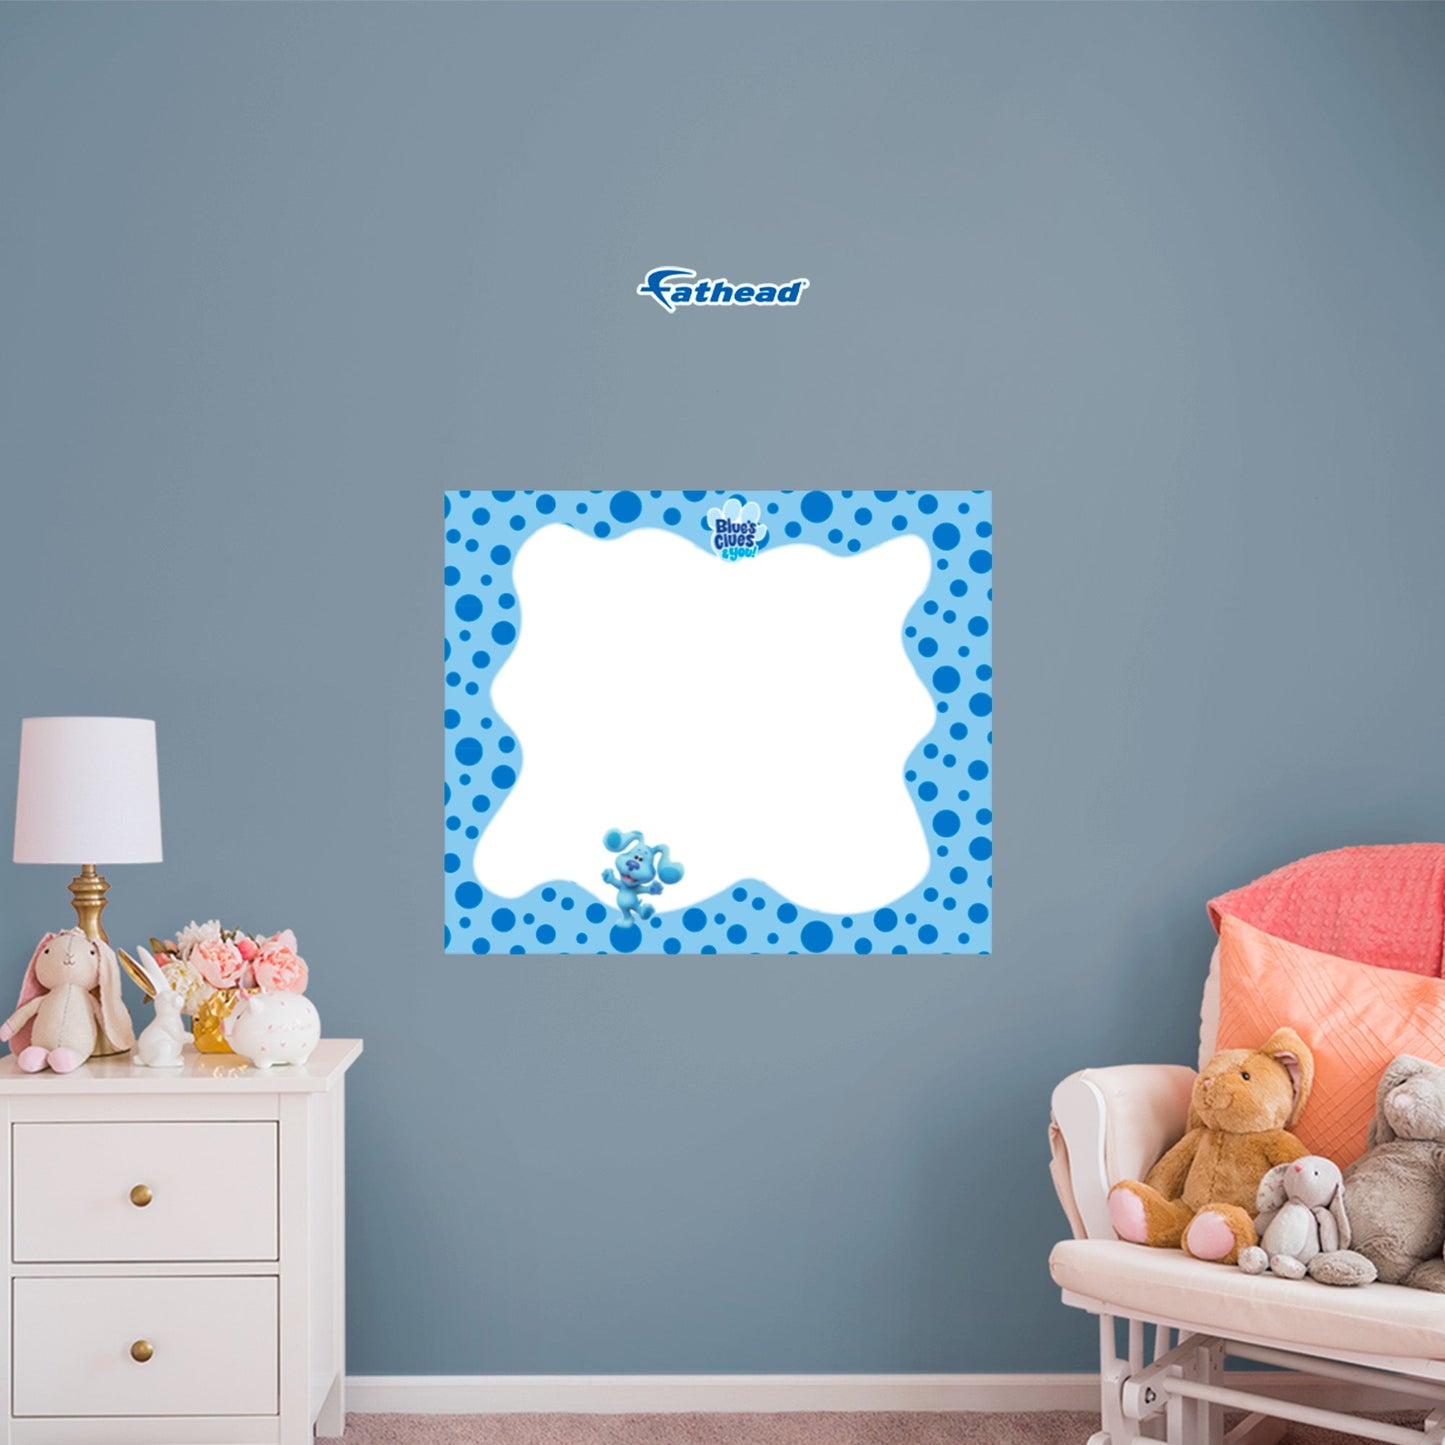 Blue's Clues: Blue Dry Erase - Officially Licensed Nickelodeon Removable Adhesive Decal